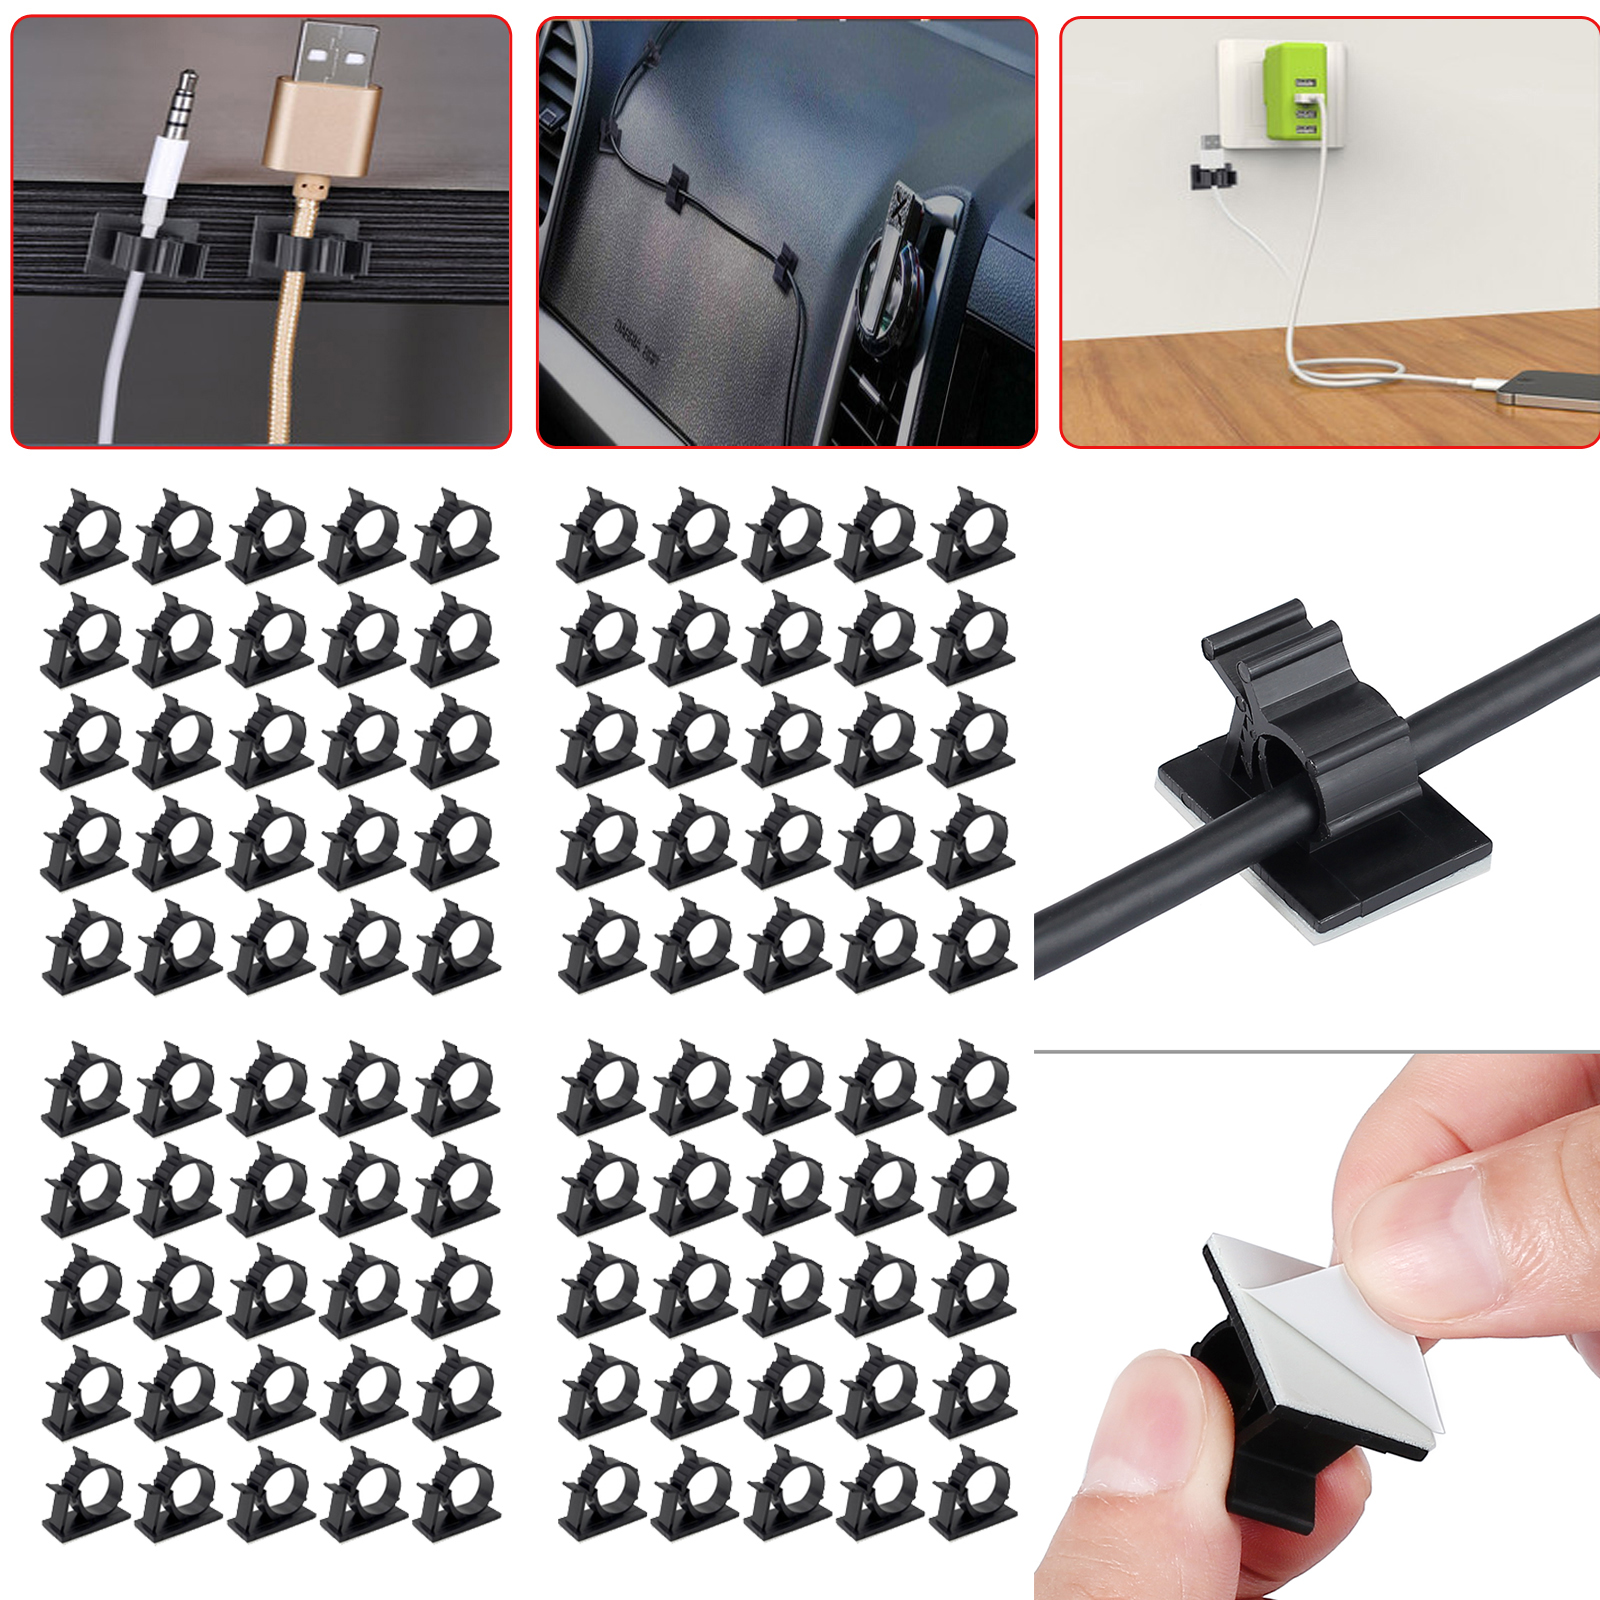 100X Cable Clips Self-Adhesive Cord Management Black Wire Holder Organizer Clamp